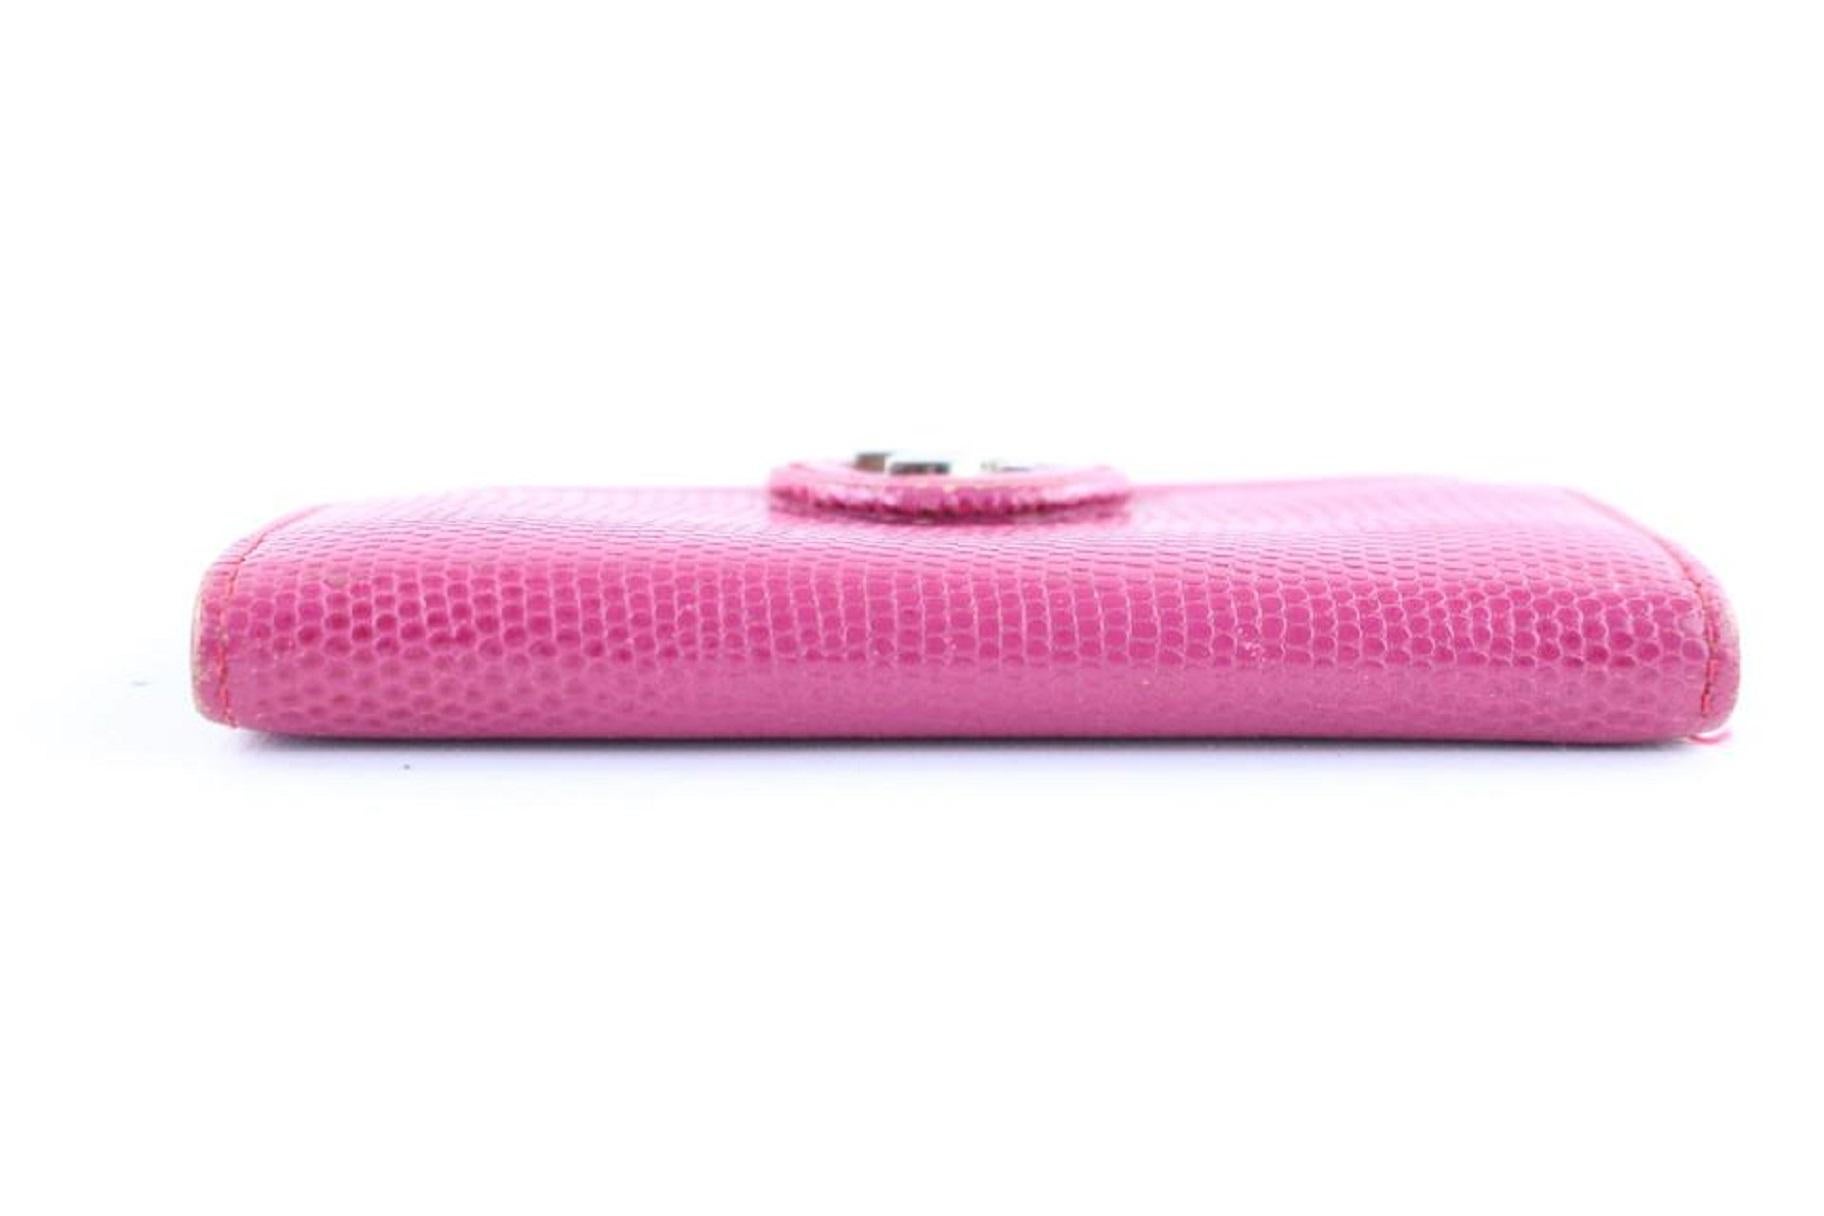 Pierre Cardin Card Wallet 7mr0115 Pink Clutch In Good Condition For Sale In Dix hills, NY